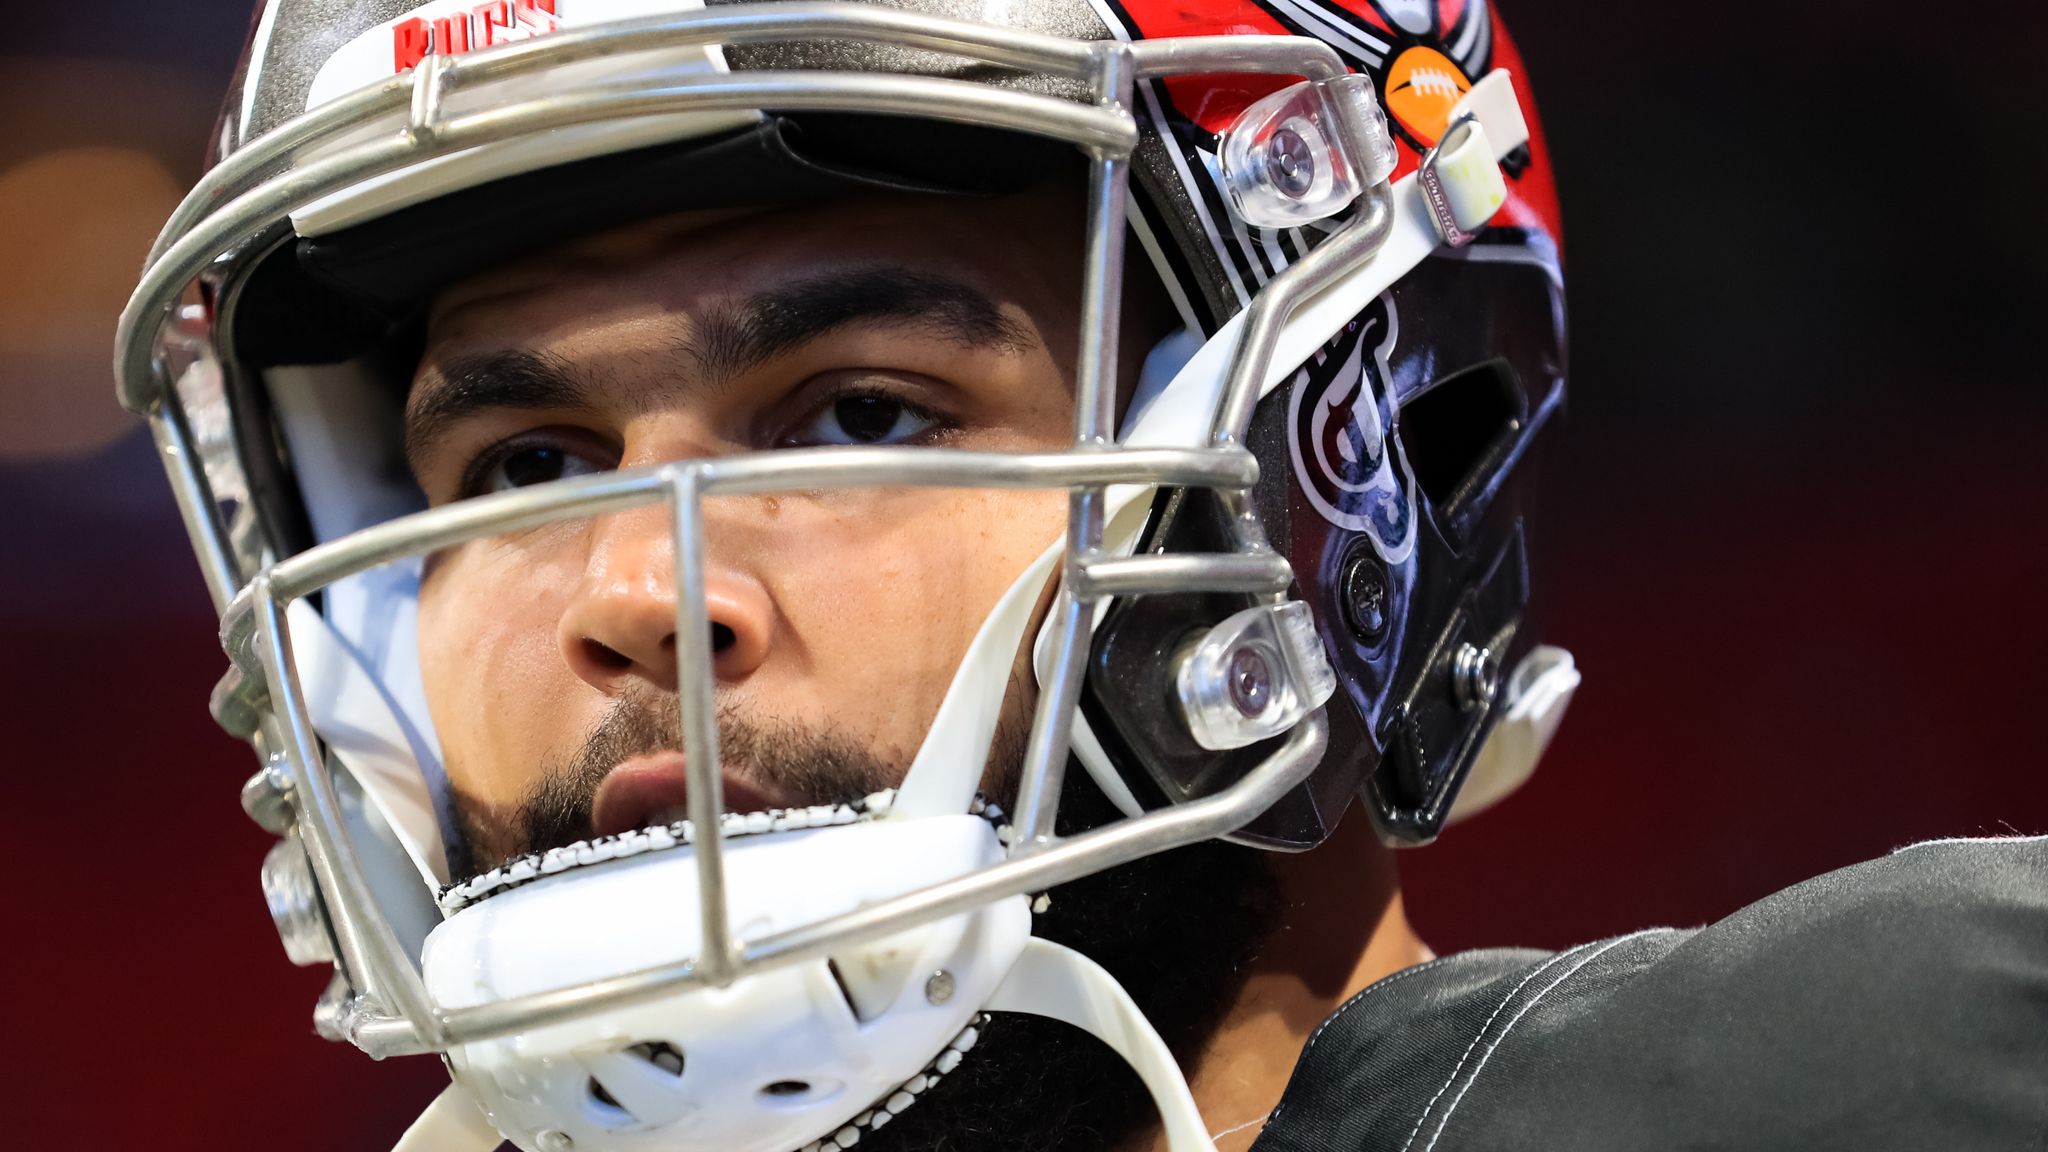 Family and Football: Mike Evans on lessons from the field to home